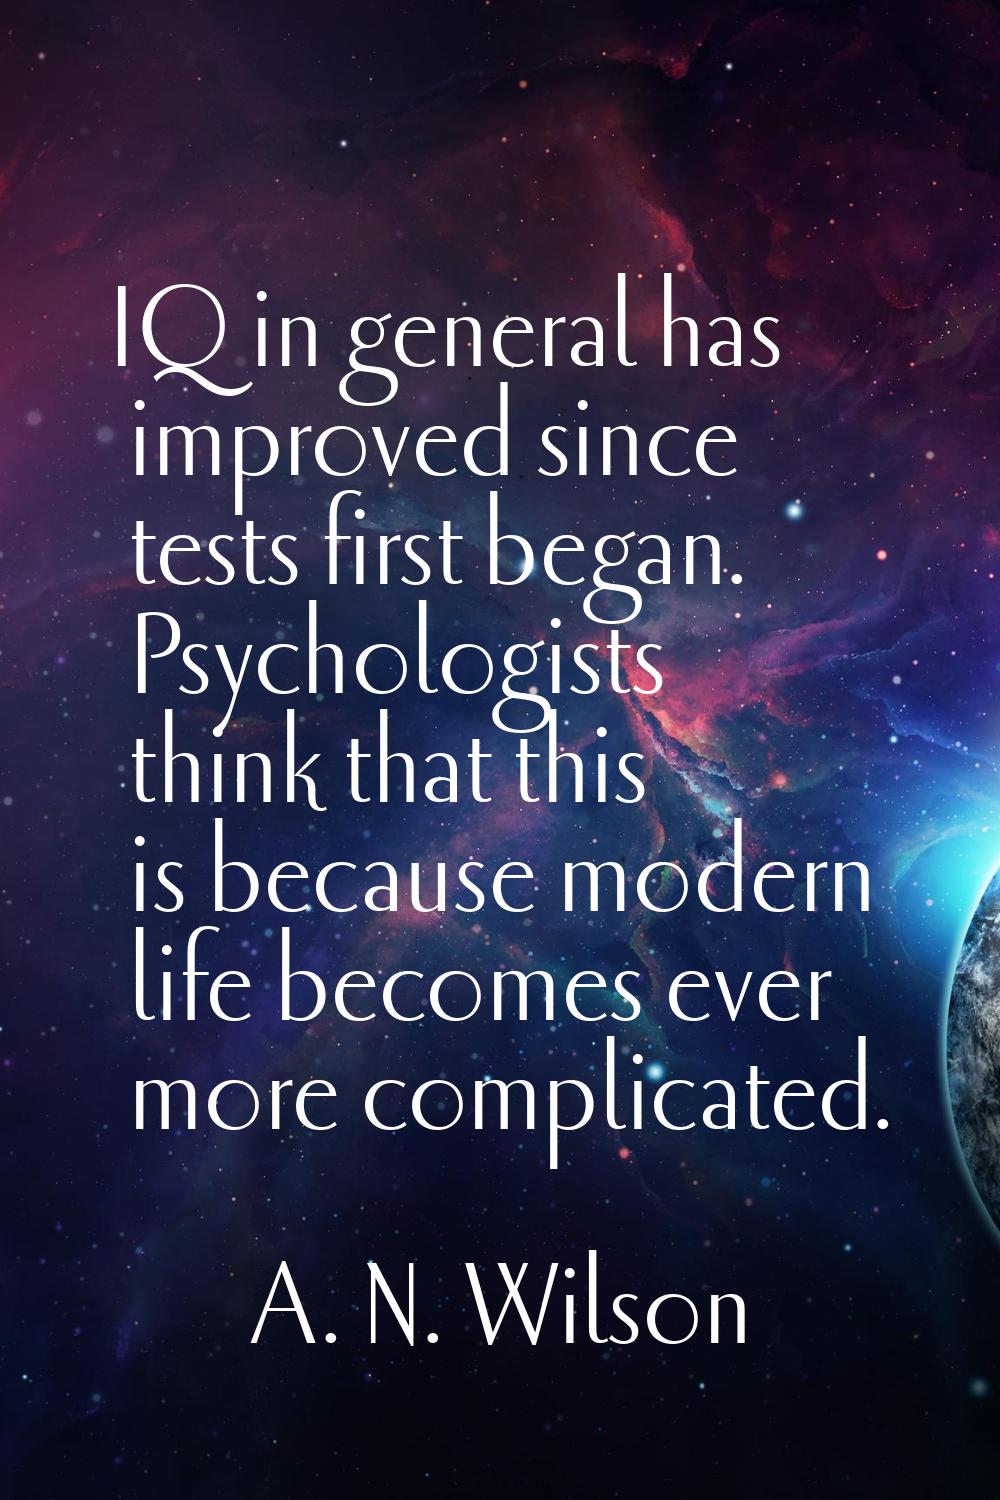 IQ in general has improved since tests first began. Psychologists think that this is because modern